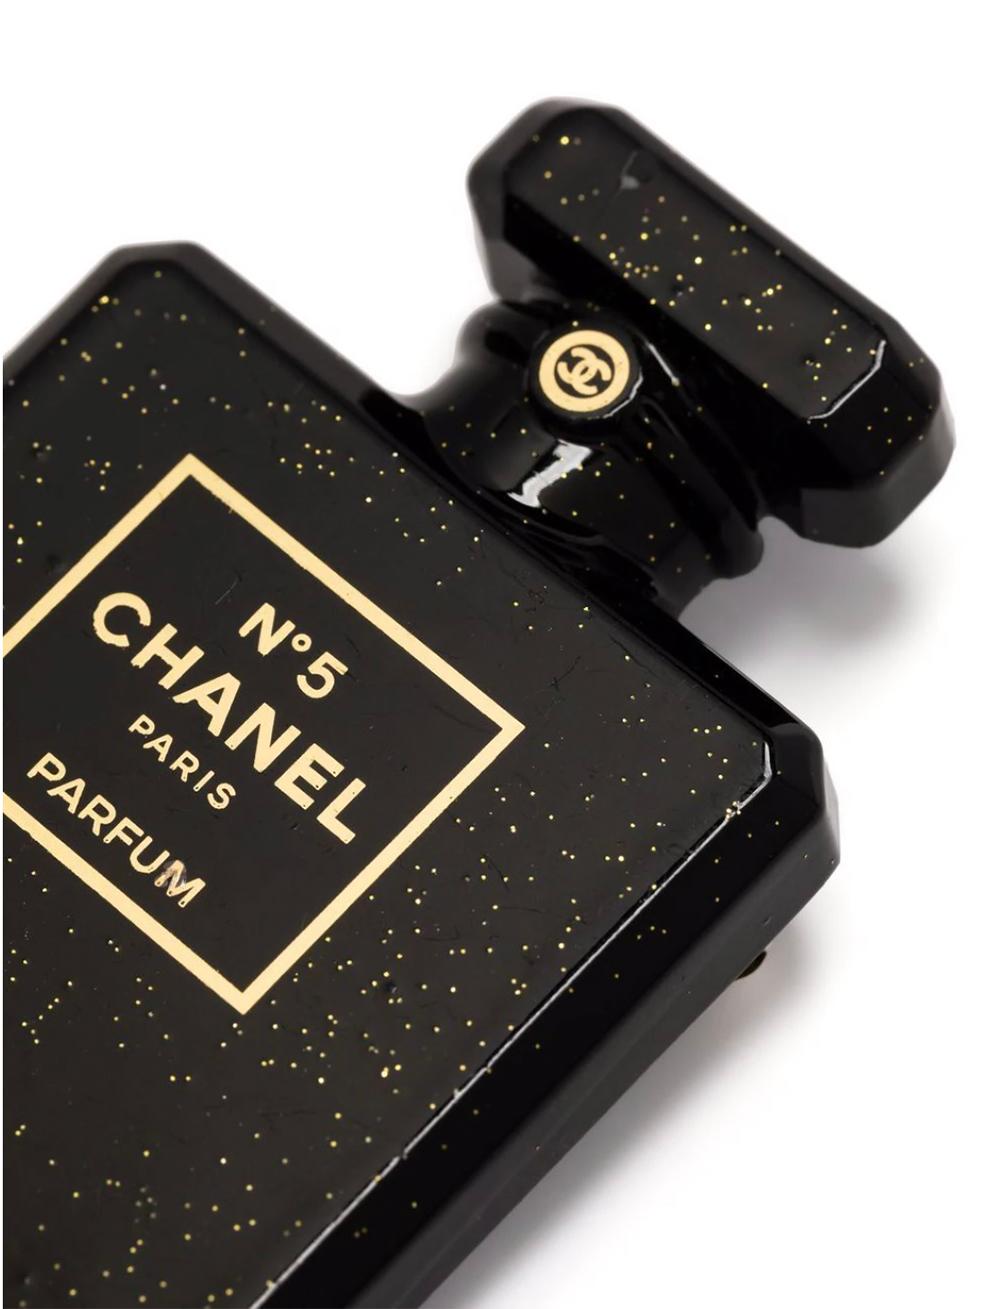 Black Chanel brooch featuring a black and gold-tone colours, a signature N°5 motif, perfume bottle motif, a black top logo medal, a logo plaque at back and a safety pin.
Circa: 2021
Width: 1.25in. (3.5cm) 
Maxi Length:1.9in. (5cm)
In good vintage